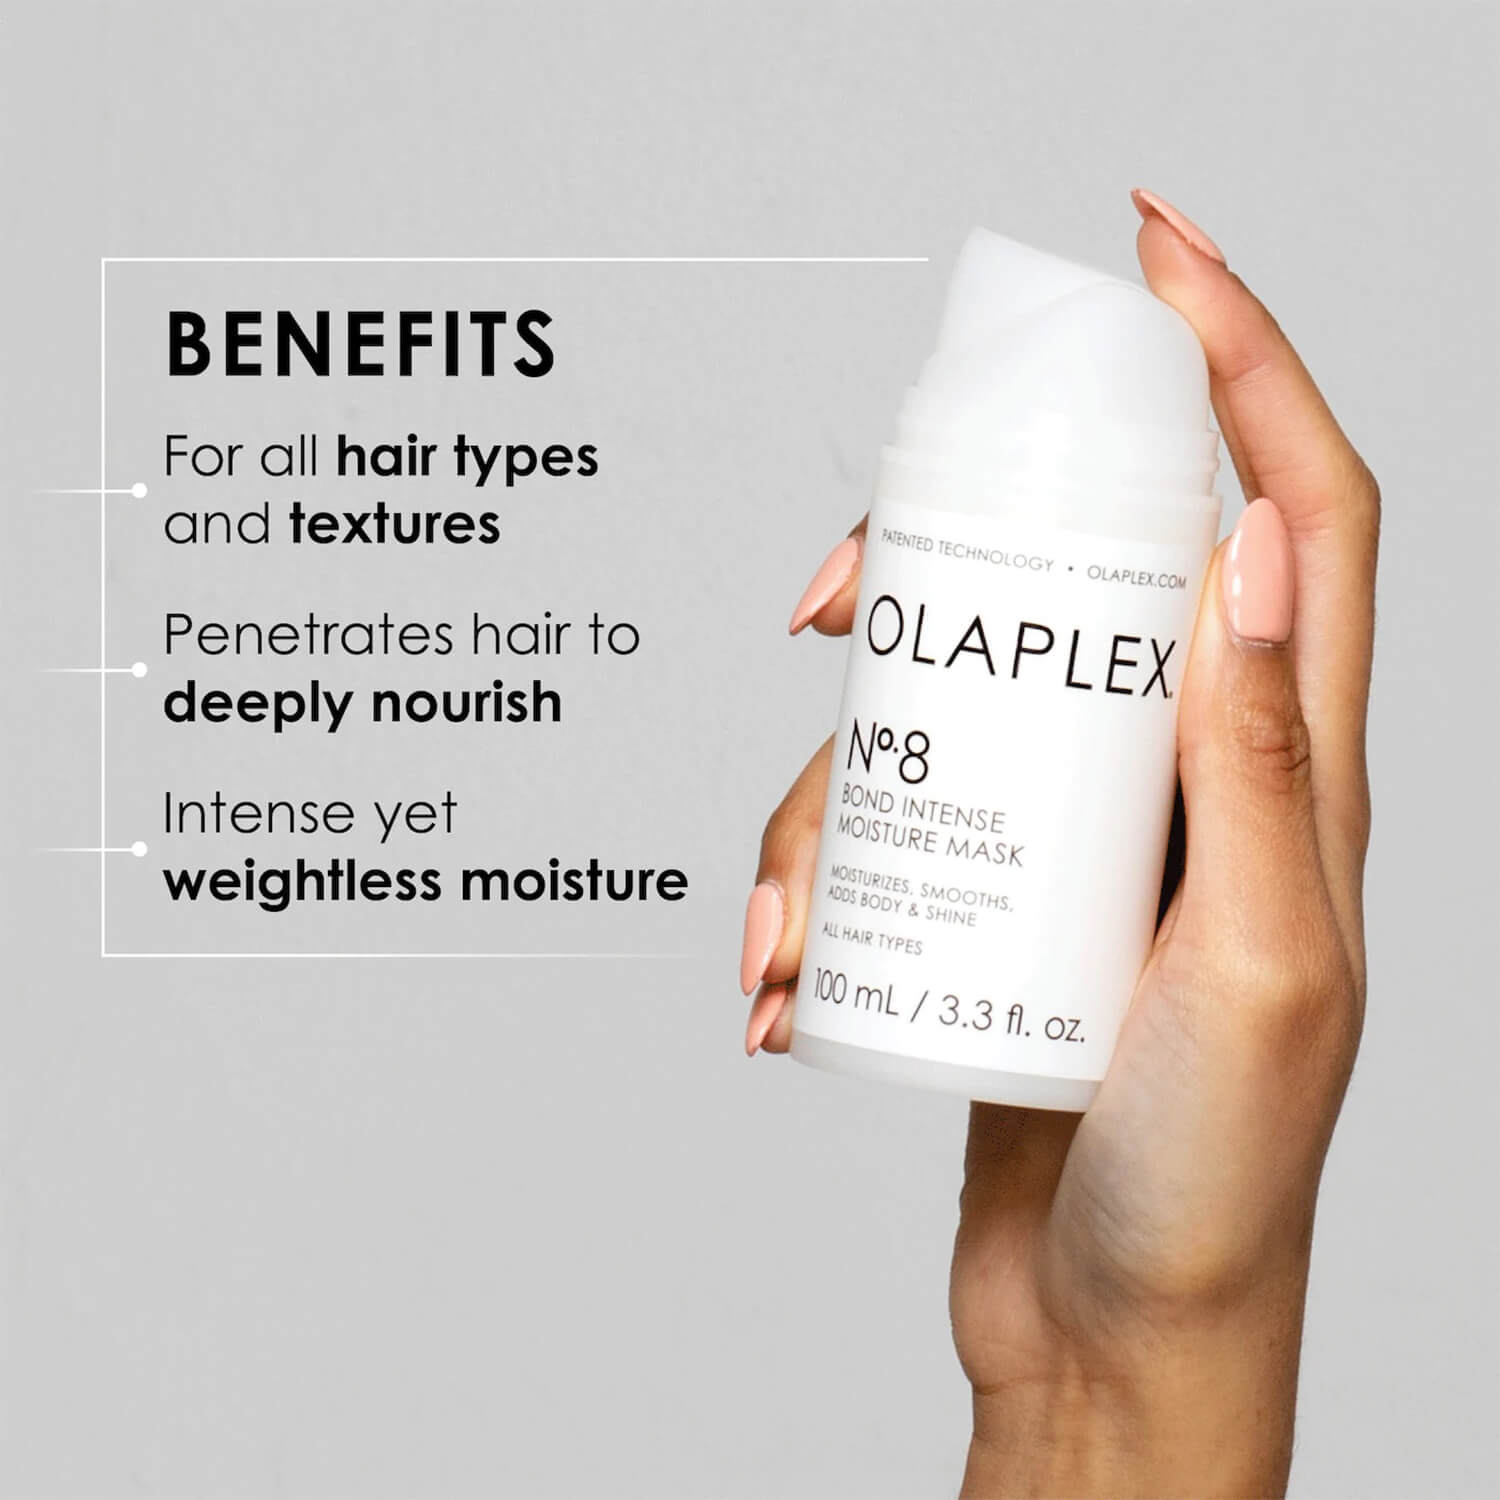 image showing benefits of using Olaplex no 8 hair mask available at Heygirl.pk for delivery in Pakistan